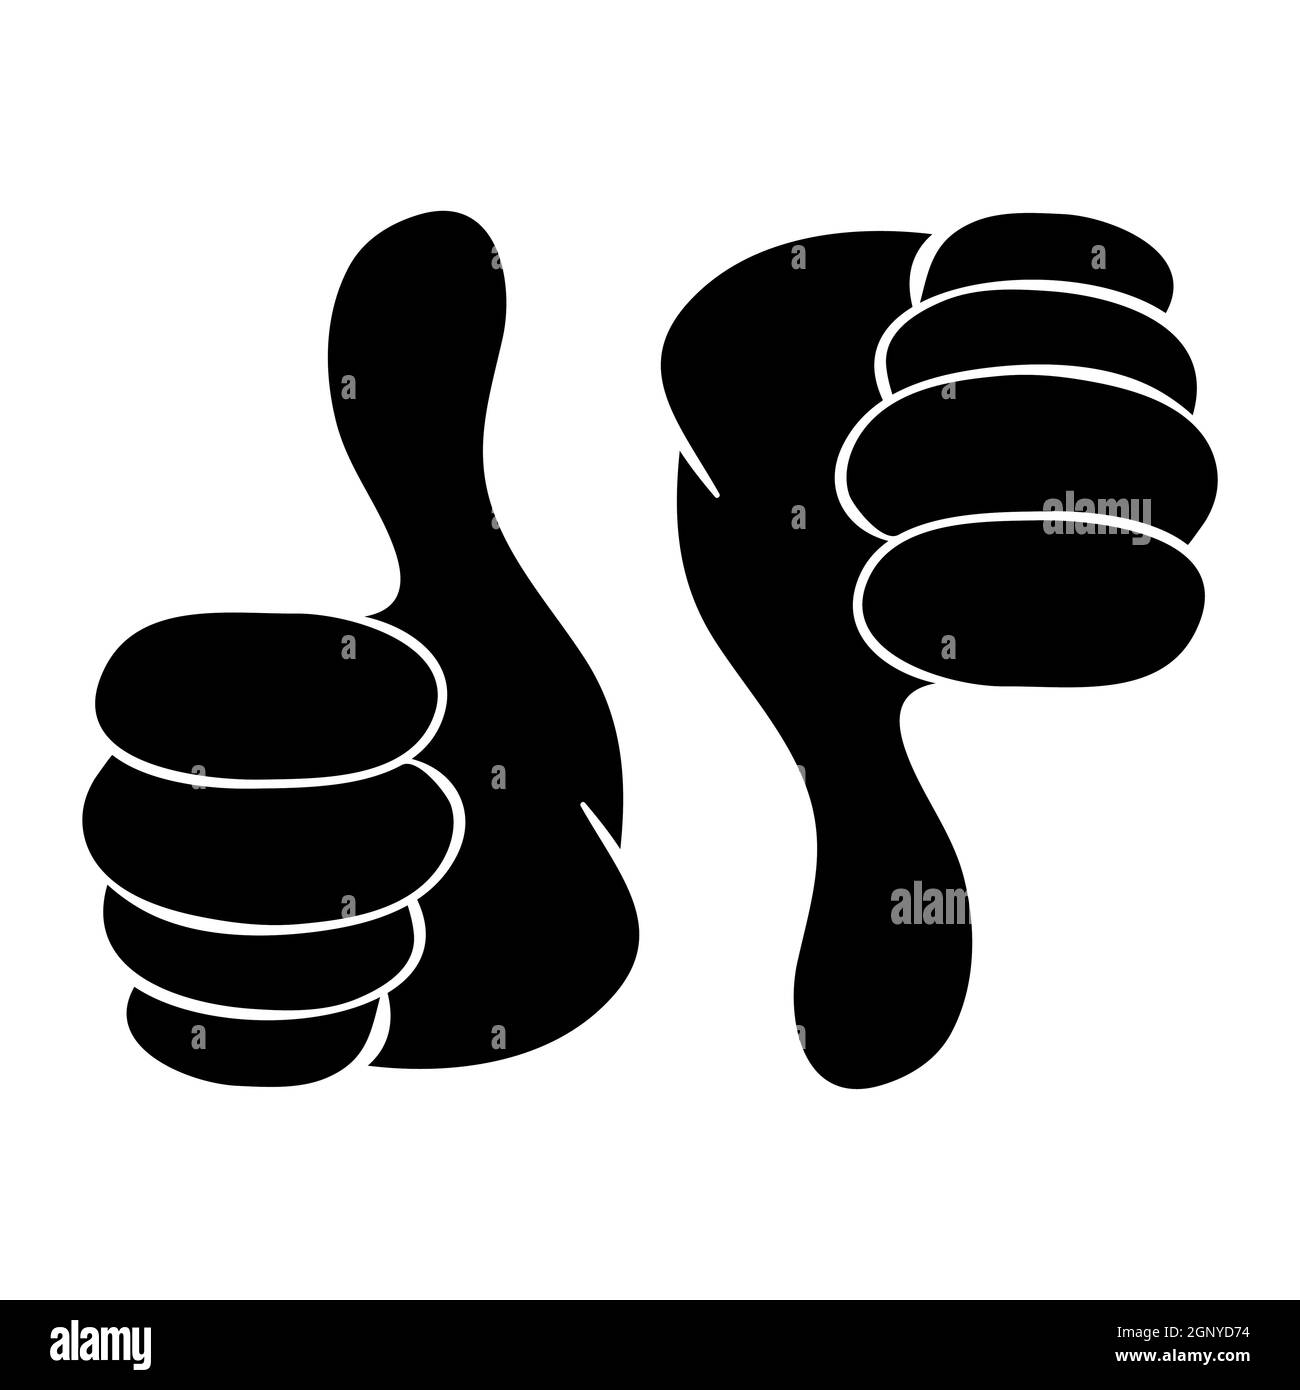 Thumb up and down silhouette icon. Black shape symbol of OK or not OK expression. LIKE or DISLIKE - social media reaction. Vector design isolated on white background. Stock Vector